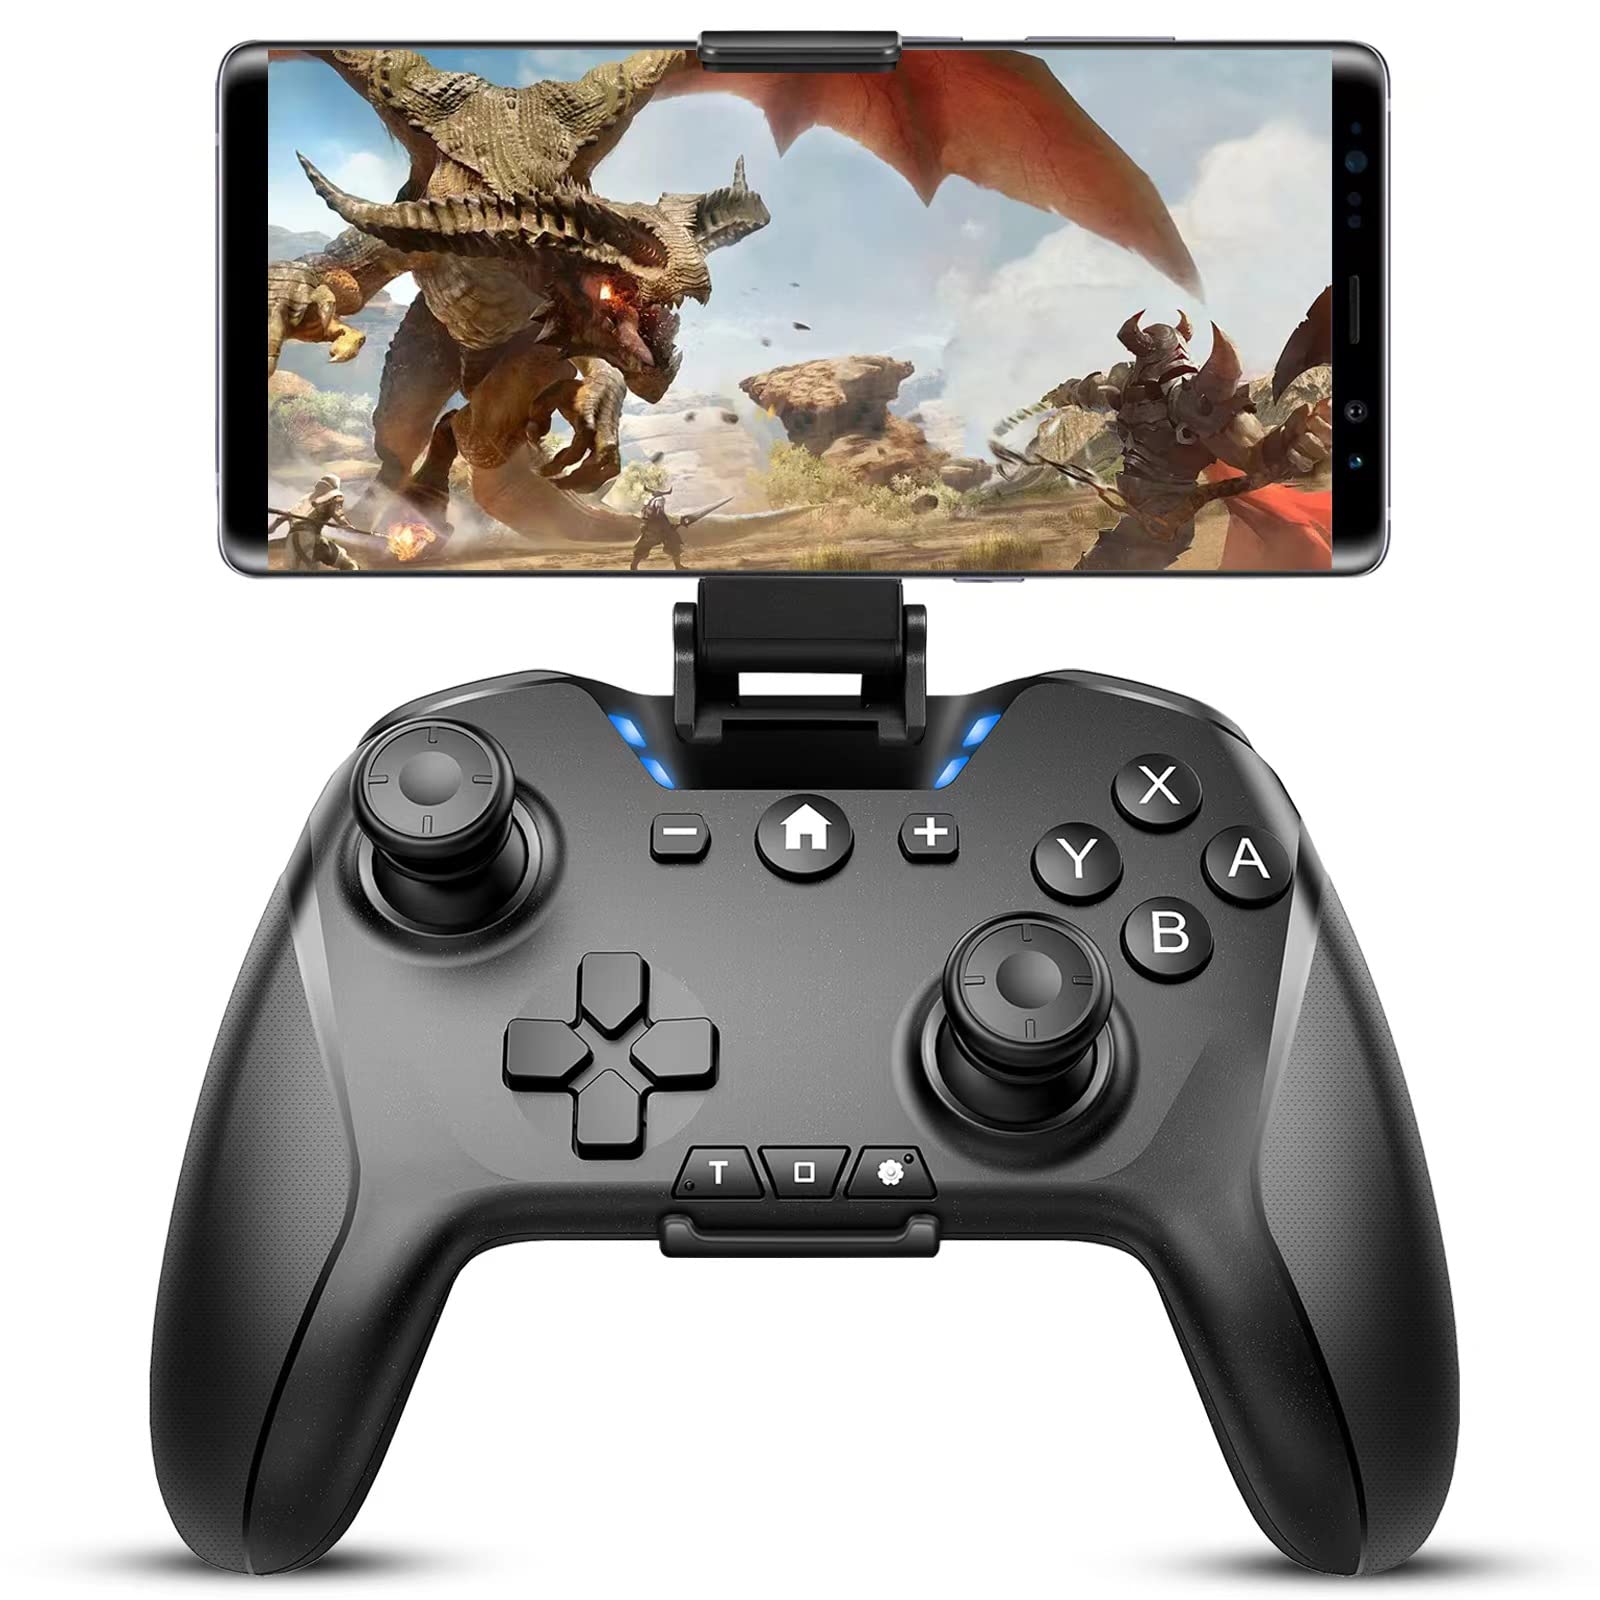 Connect the Nintendo Switch Pro Controller to the computer via Bluetooth or USB.
Open Dolphin Emulator and navigate to the "Controllers" section in the settings.